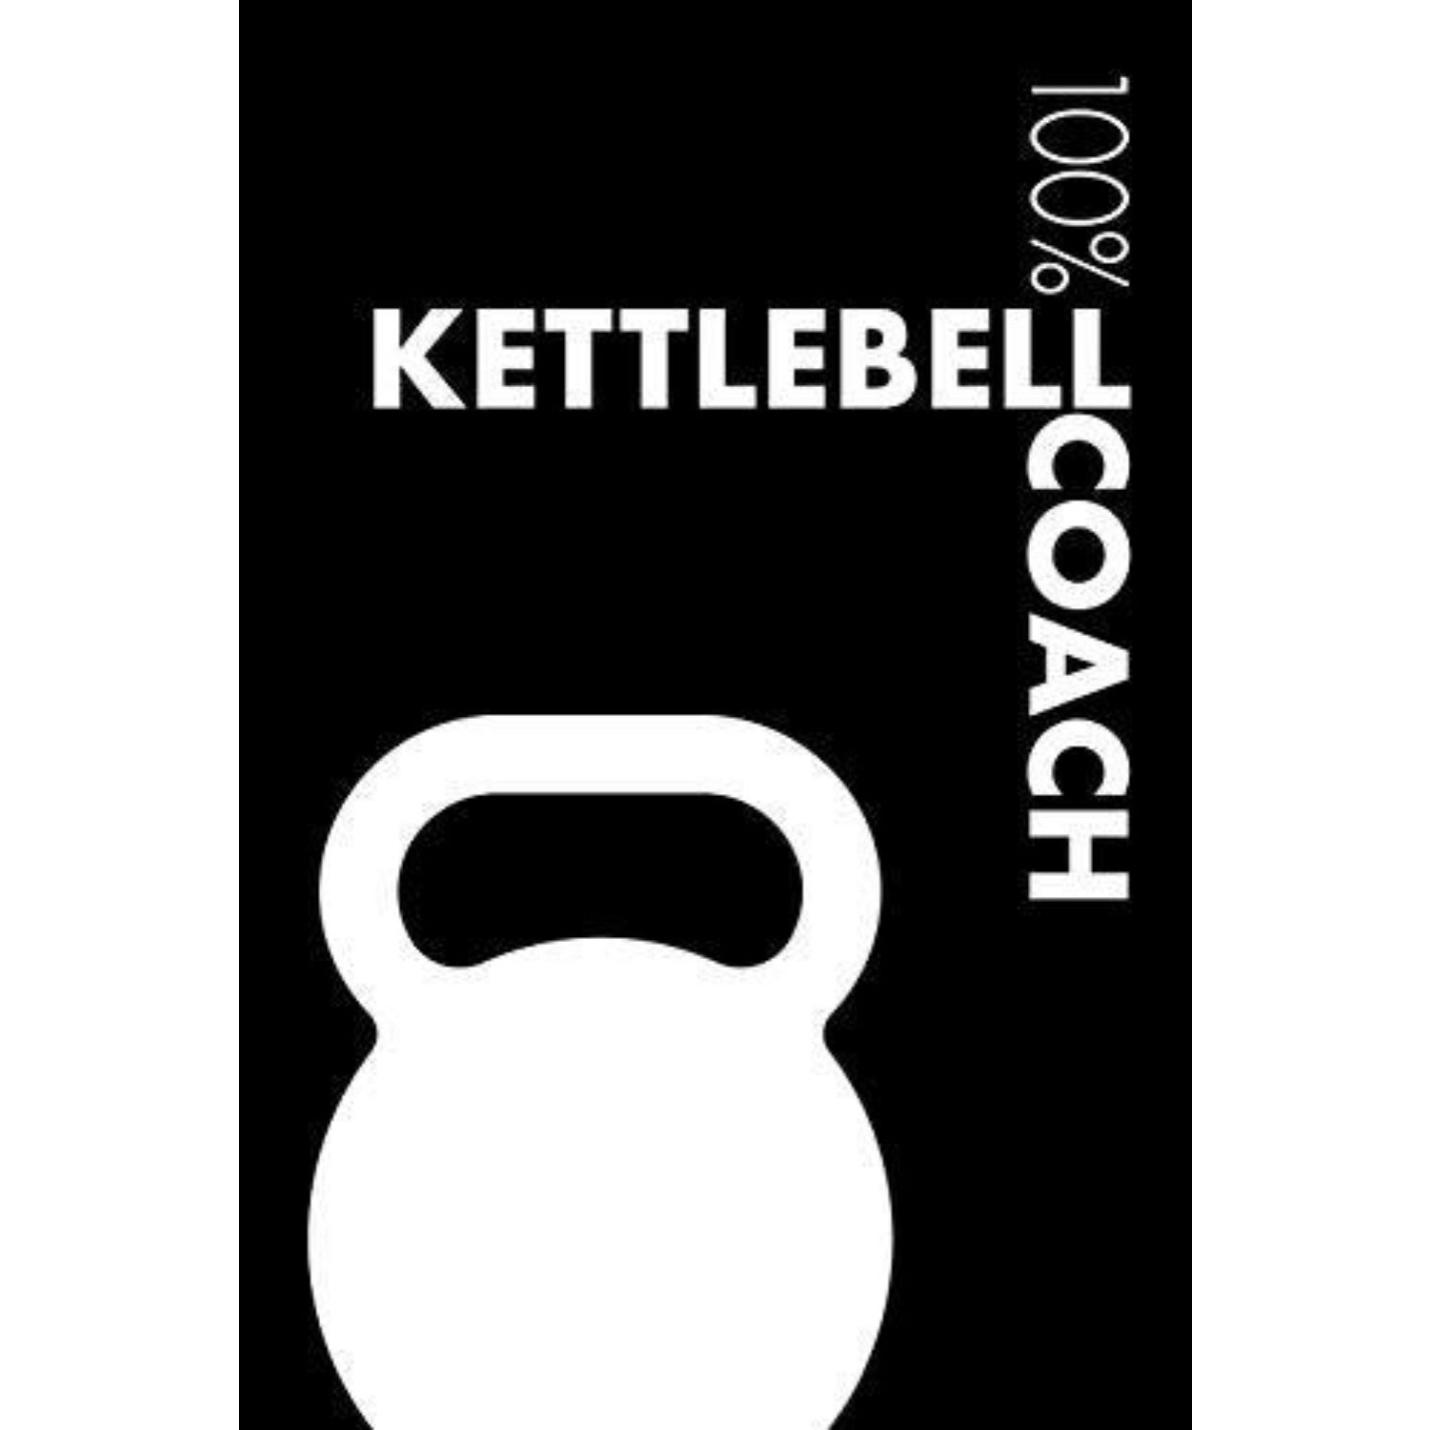 Kettlebell Coach Notebook: Blank Lined Kettlebell Journal For Coach and Practitioner - happygetfit.com